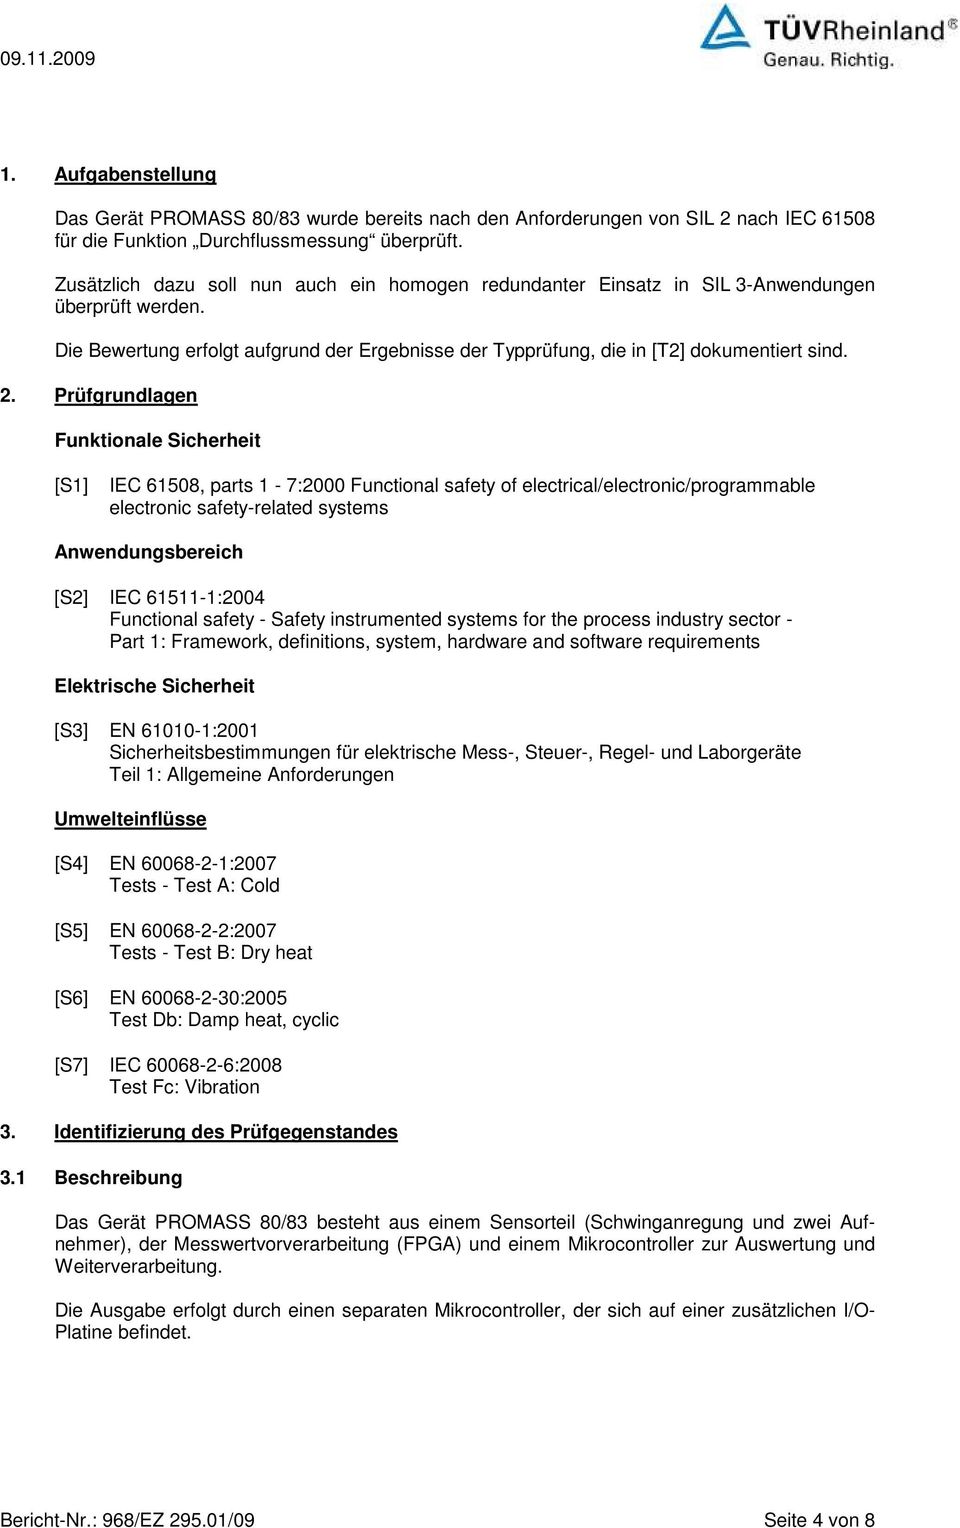 Prüfgrundlagen Funktionale Sicherheit [S1] IEC 61508, parts 1-7:2000 Functional safety of electrical/electronic/programmable electronic safety-related systems Anwendungsbereich [S2] IEC 61511-1:2004